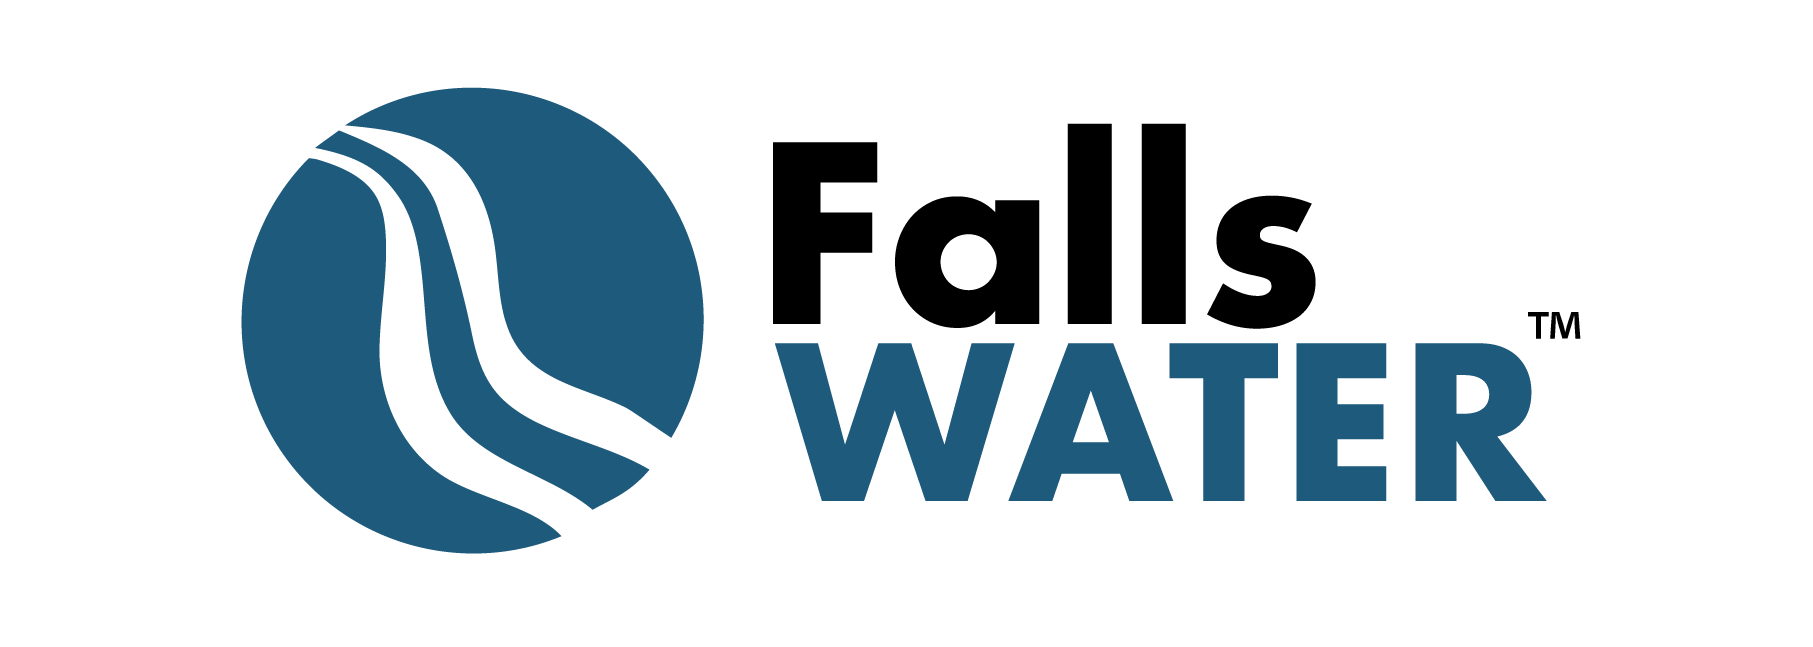 North West Natural Water Company